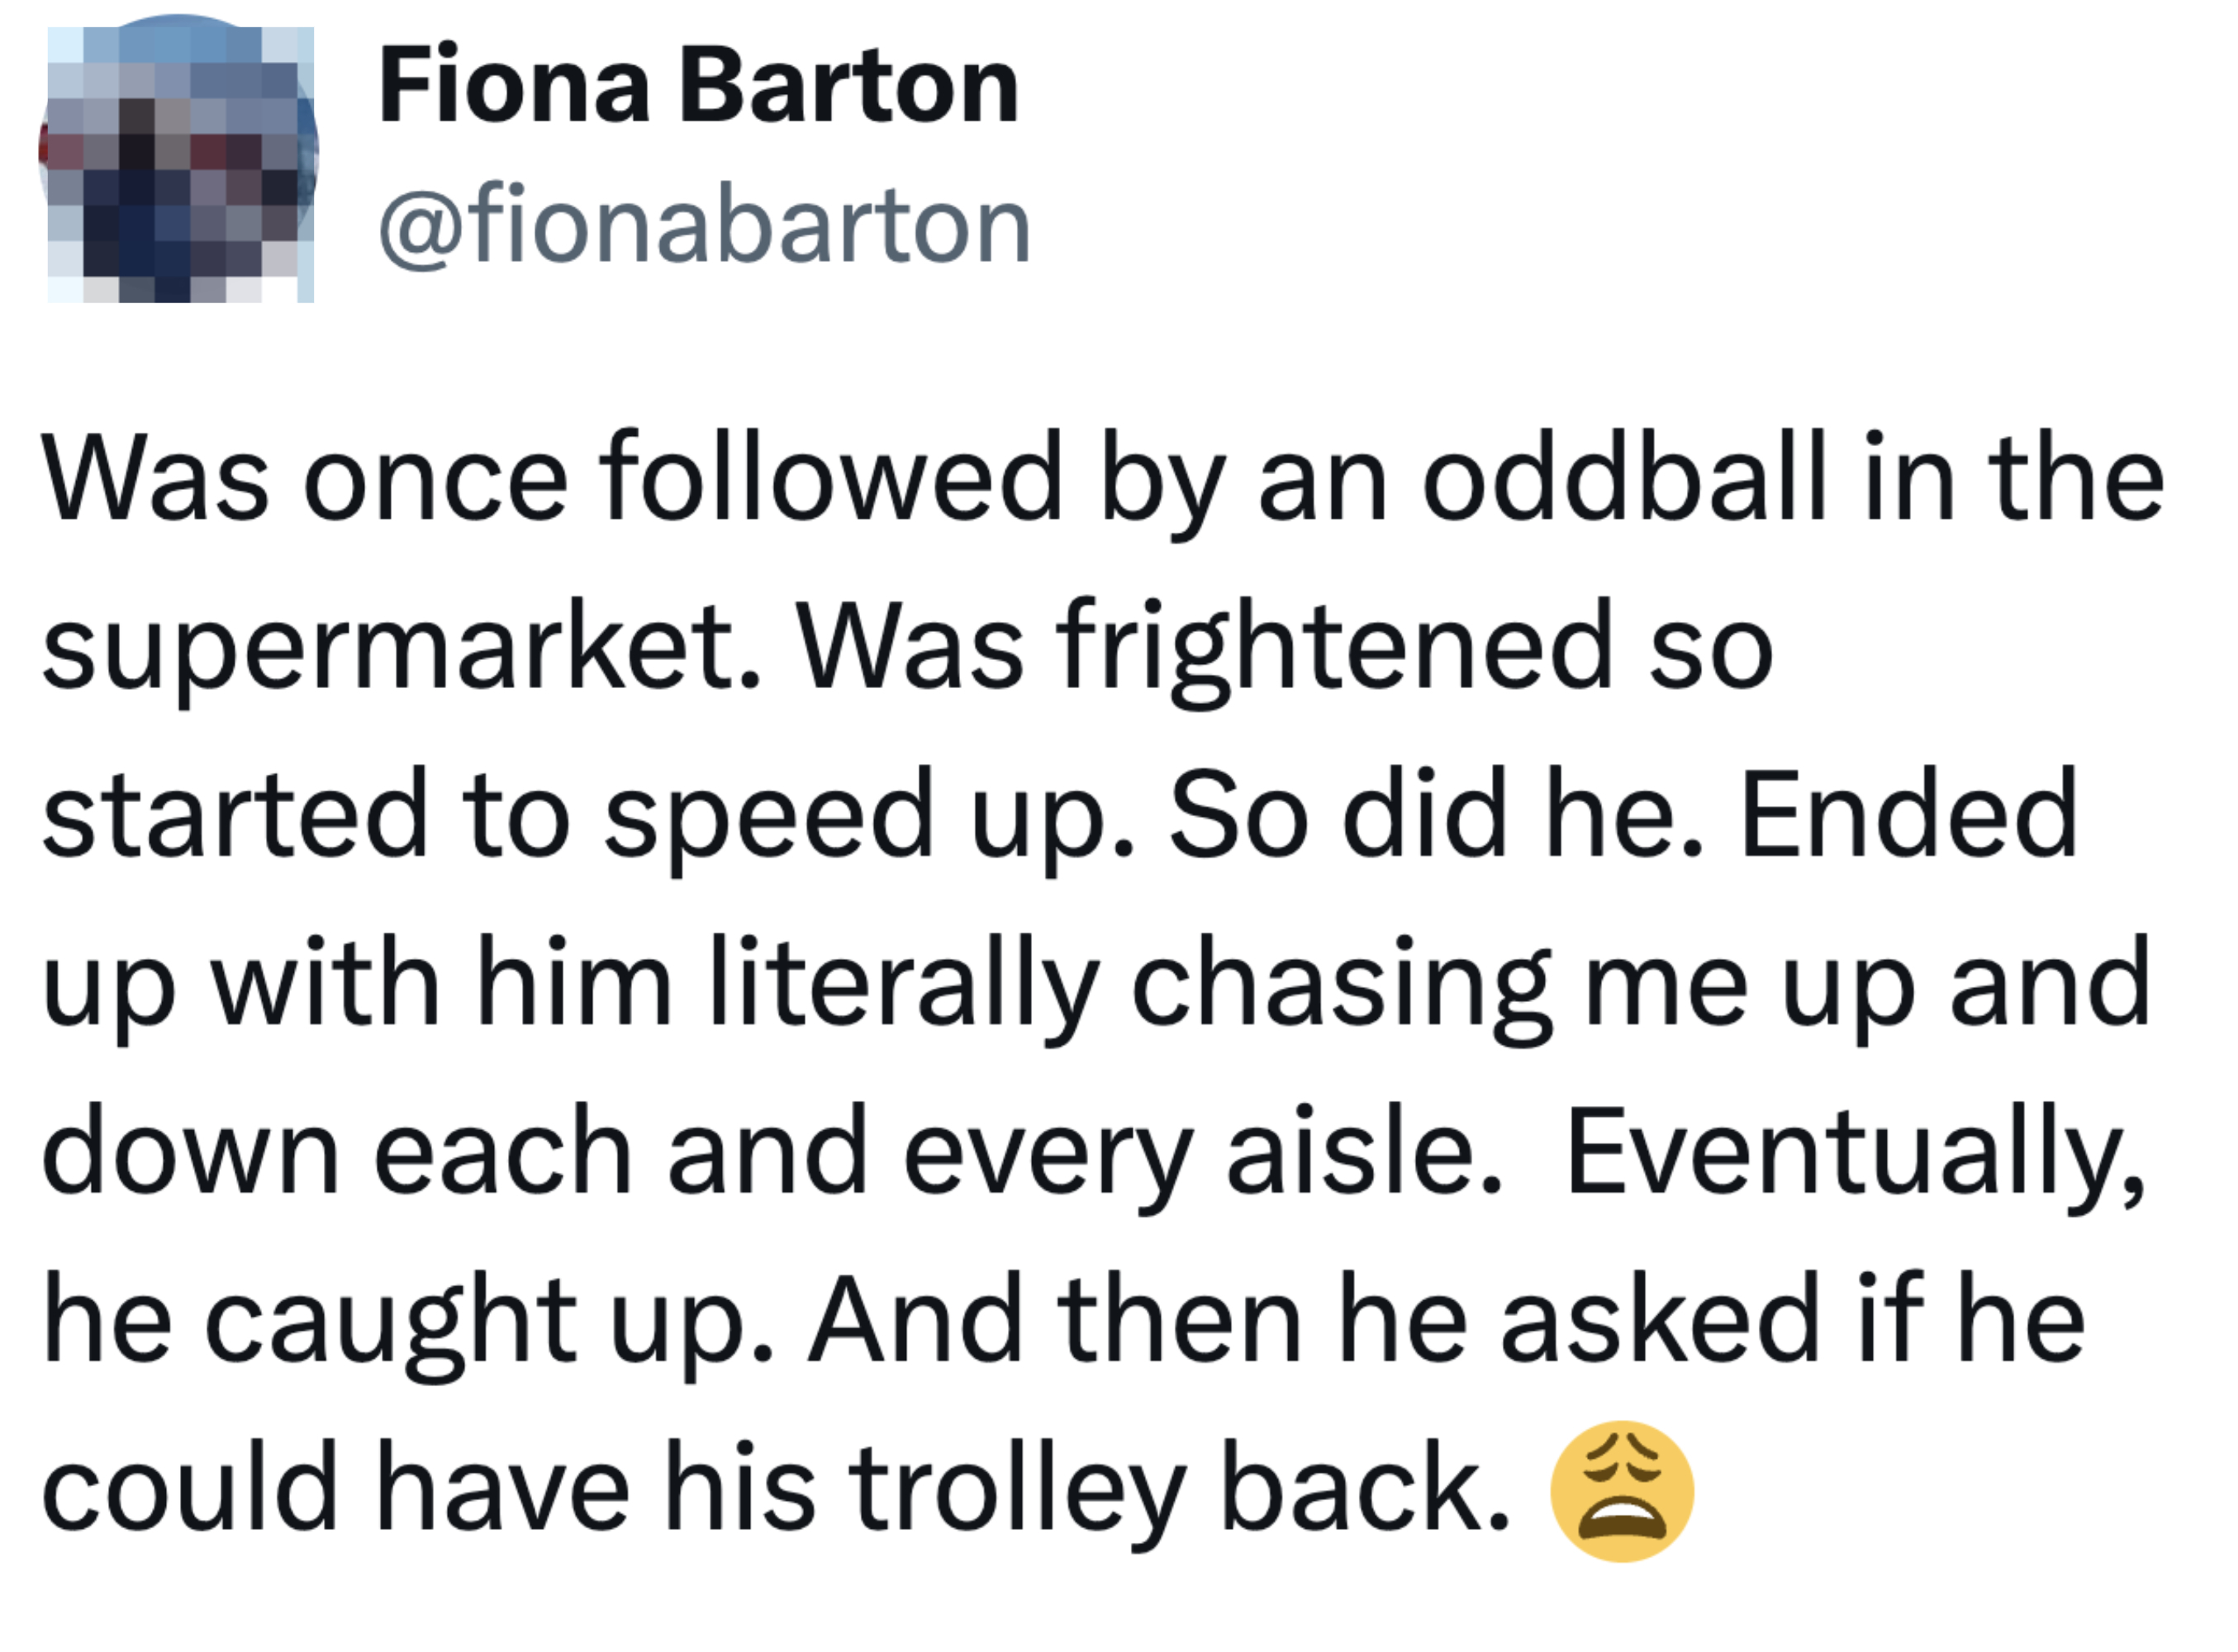 Tweet by Fiona Barton describing an odd encounter where she was followed and then chased in a supermarket, resulting in an awkward situation